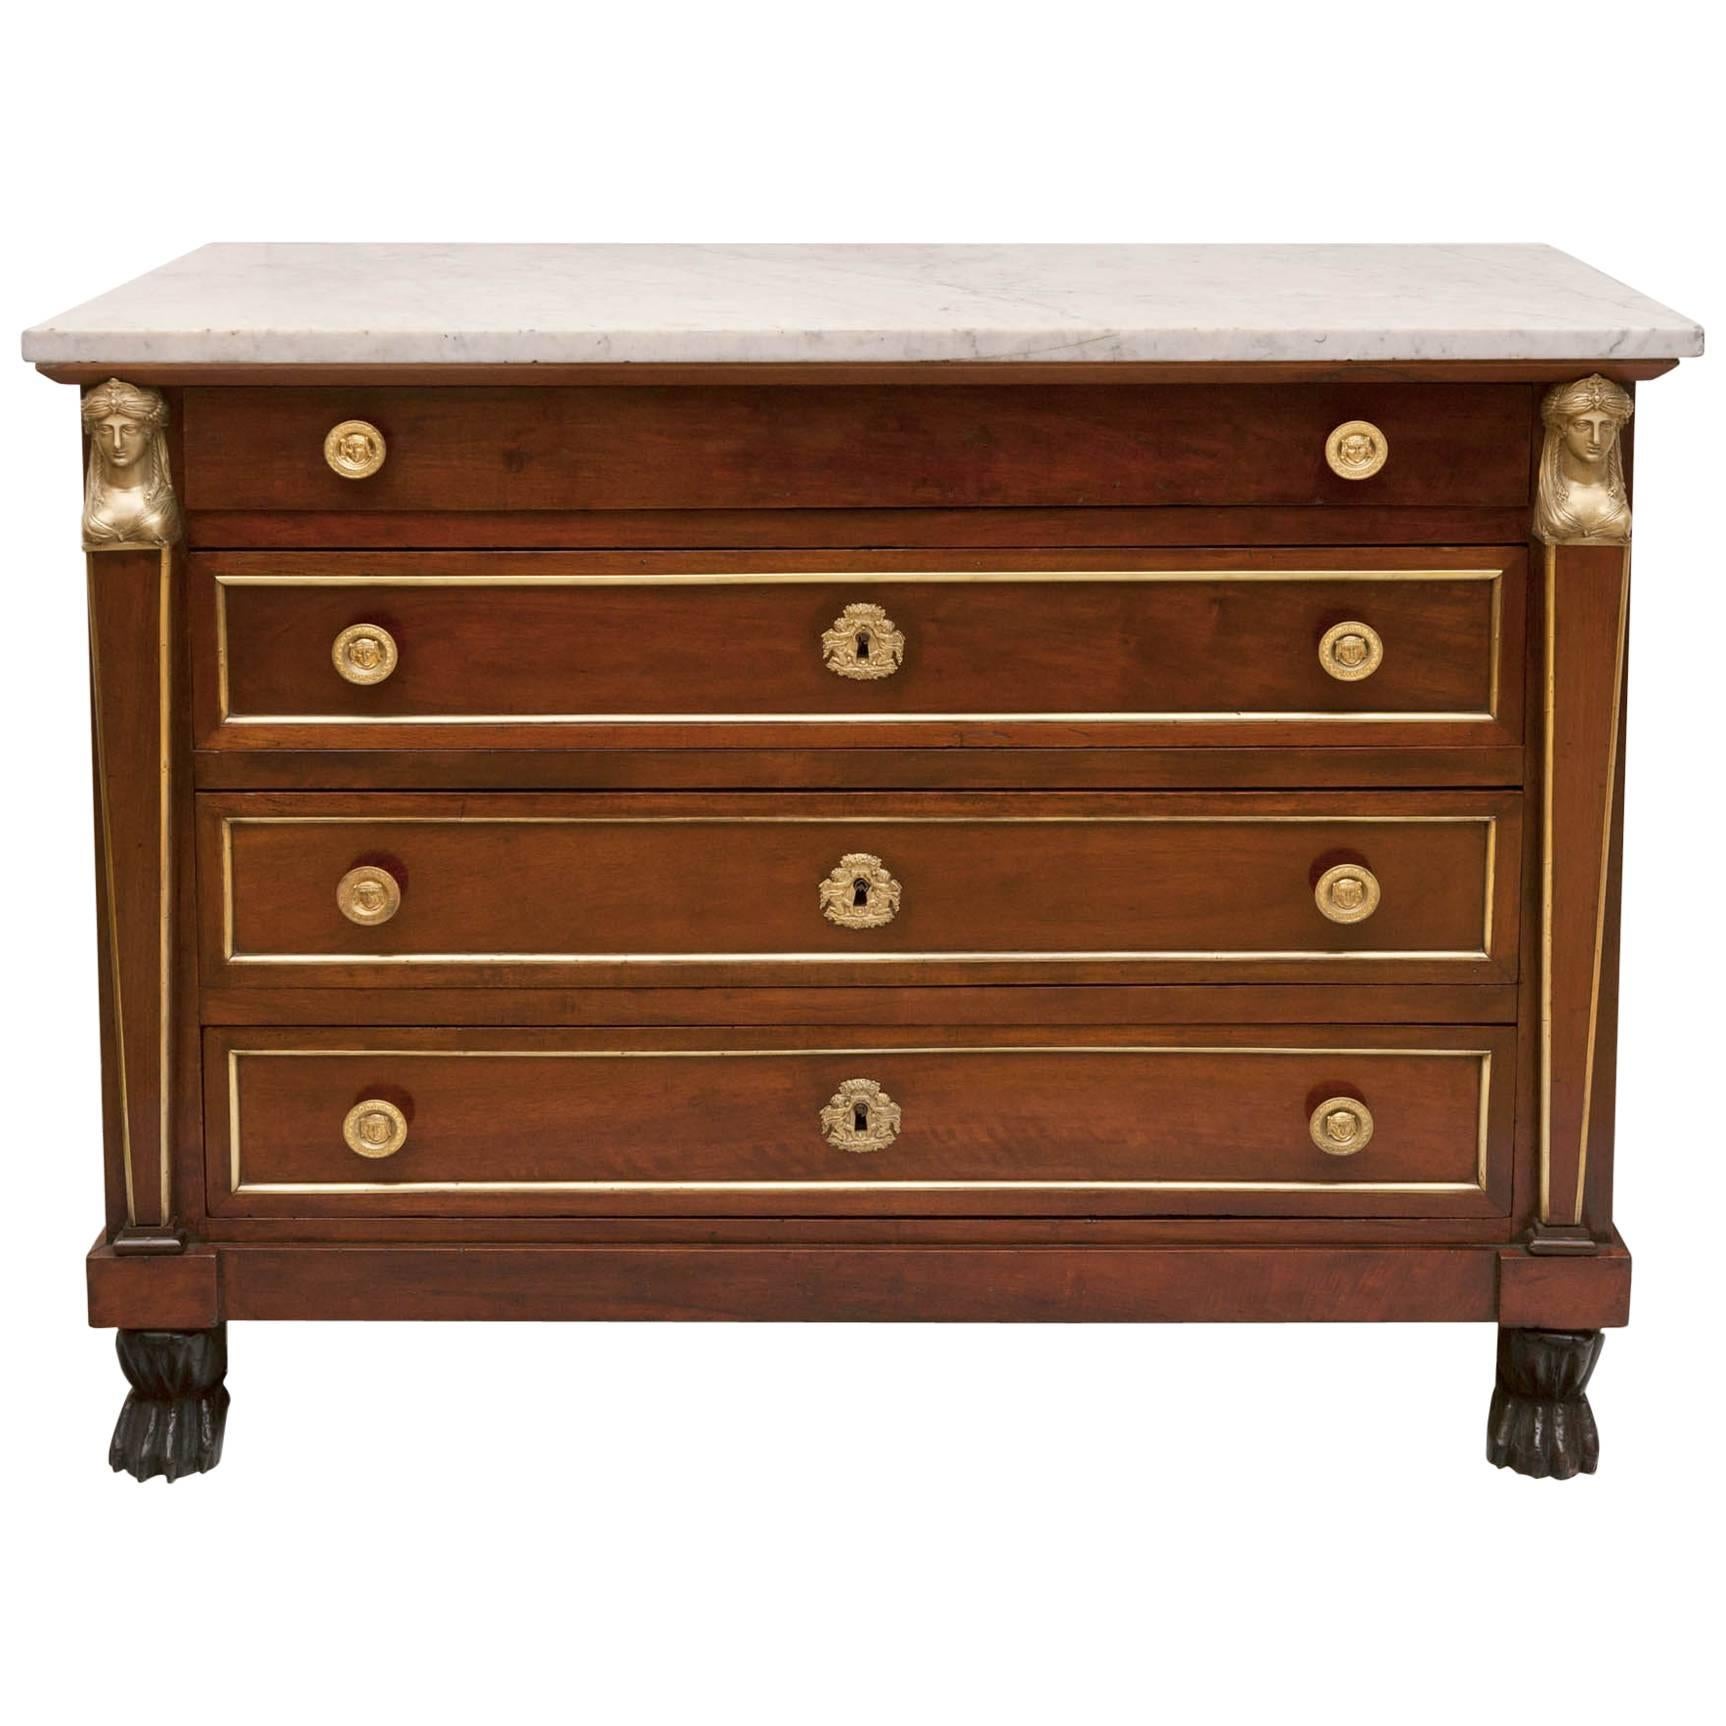 Early 19th Century Continental Empire Walnut Commode For Sale